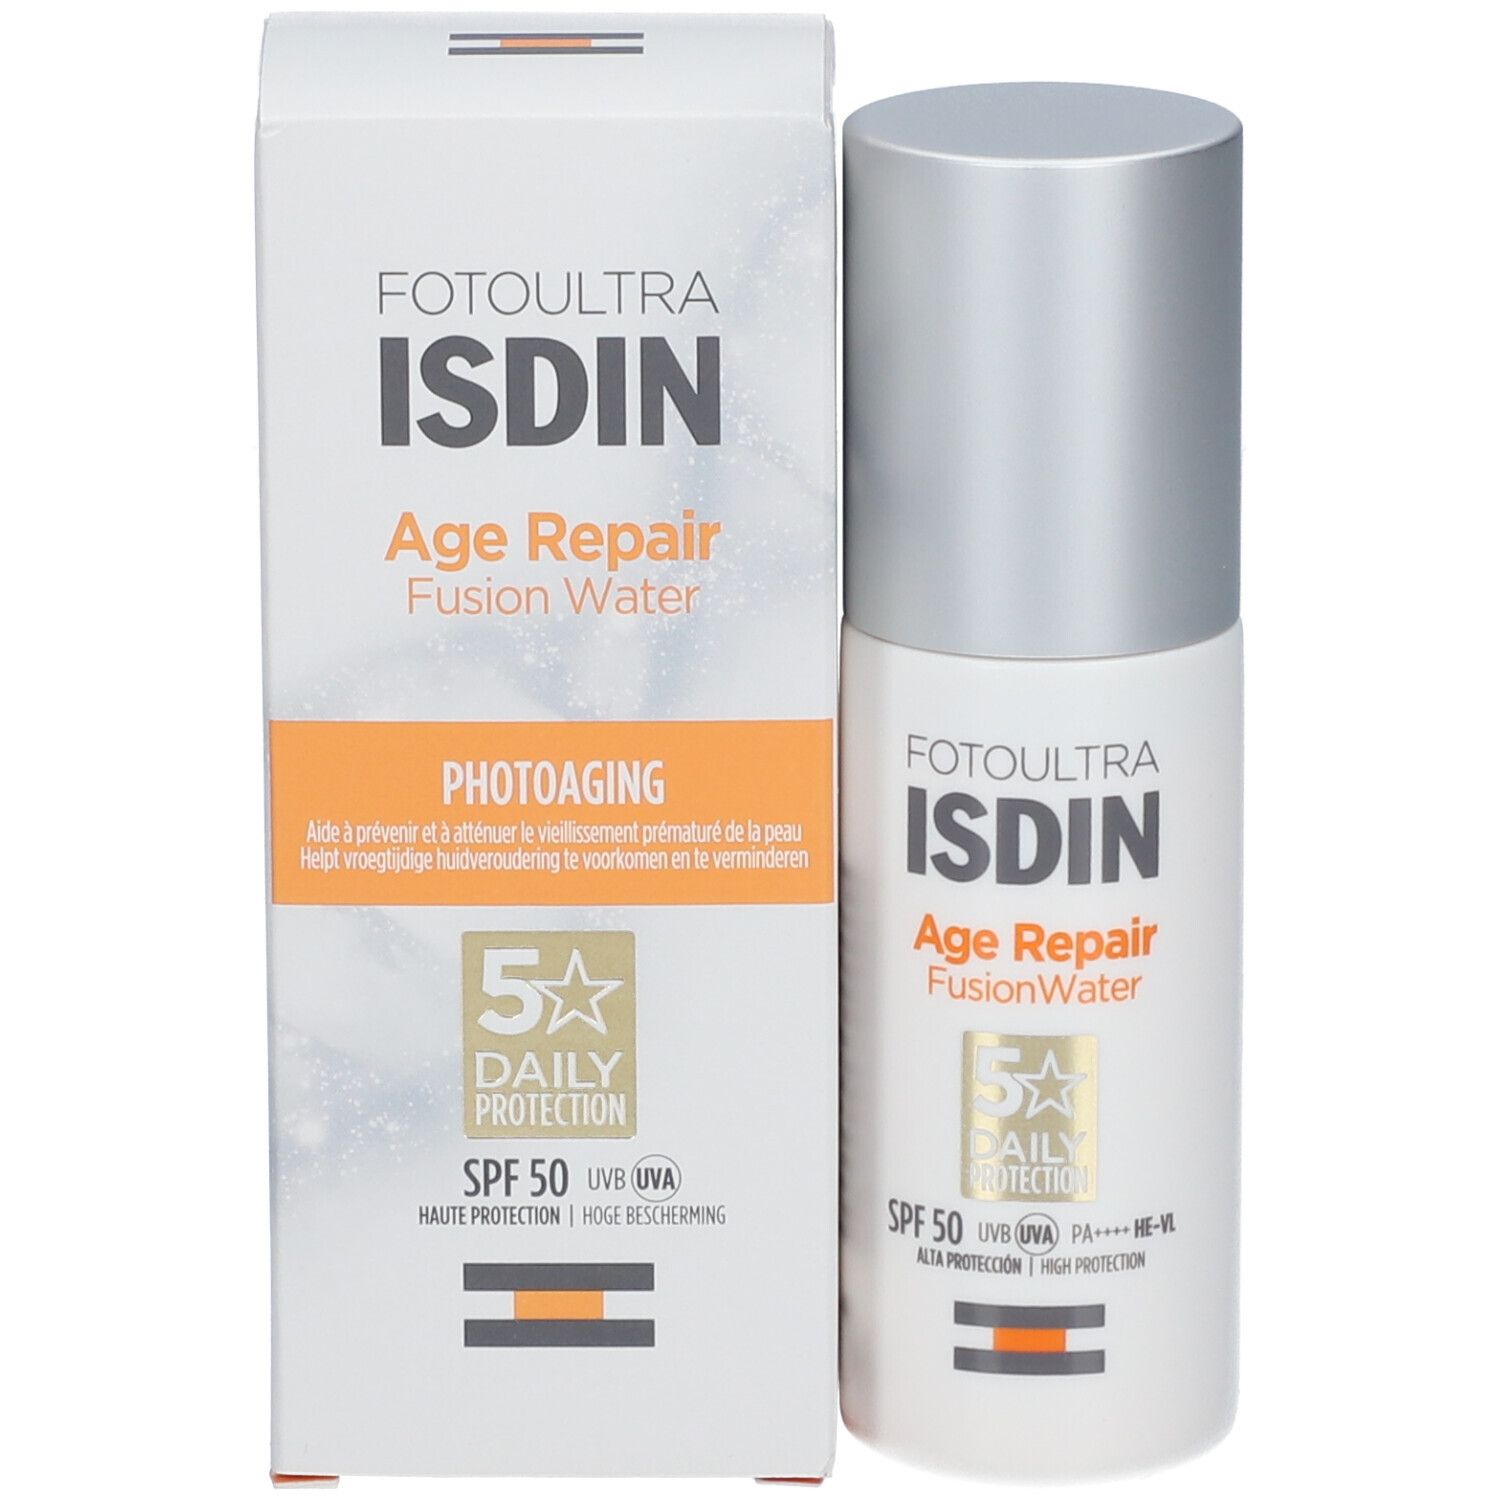 FotoUltra ISDIN® Age Repair Fusion Water texture SPF50